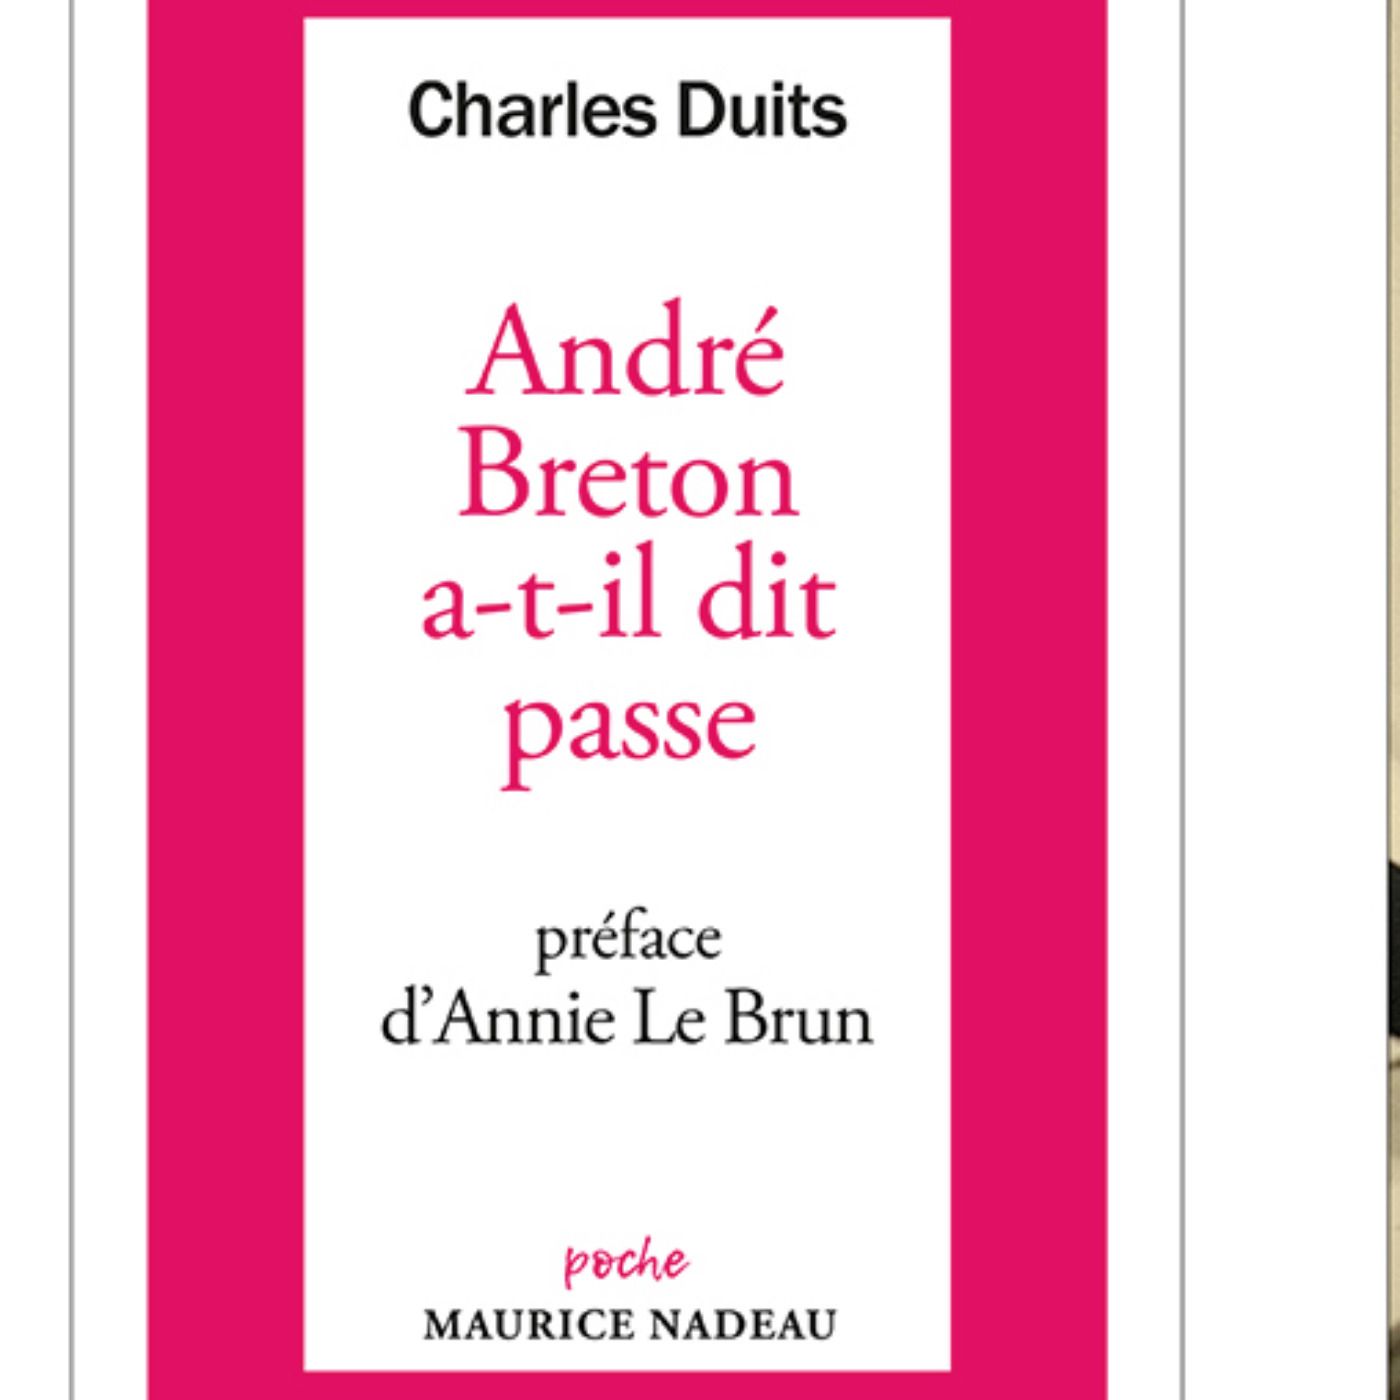 cover art for  Charles Duits , André Breton a-t-il dit passe 